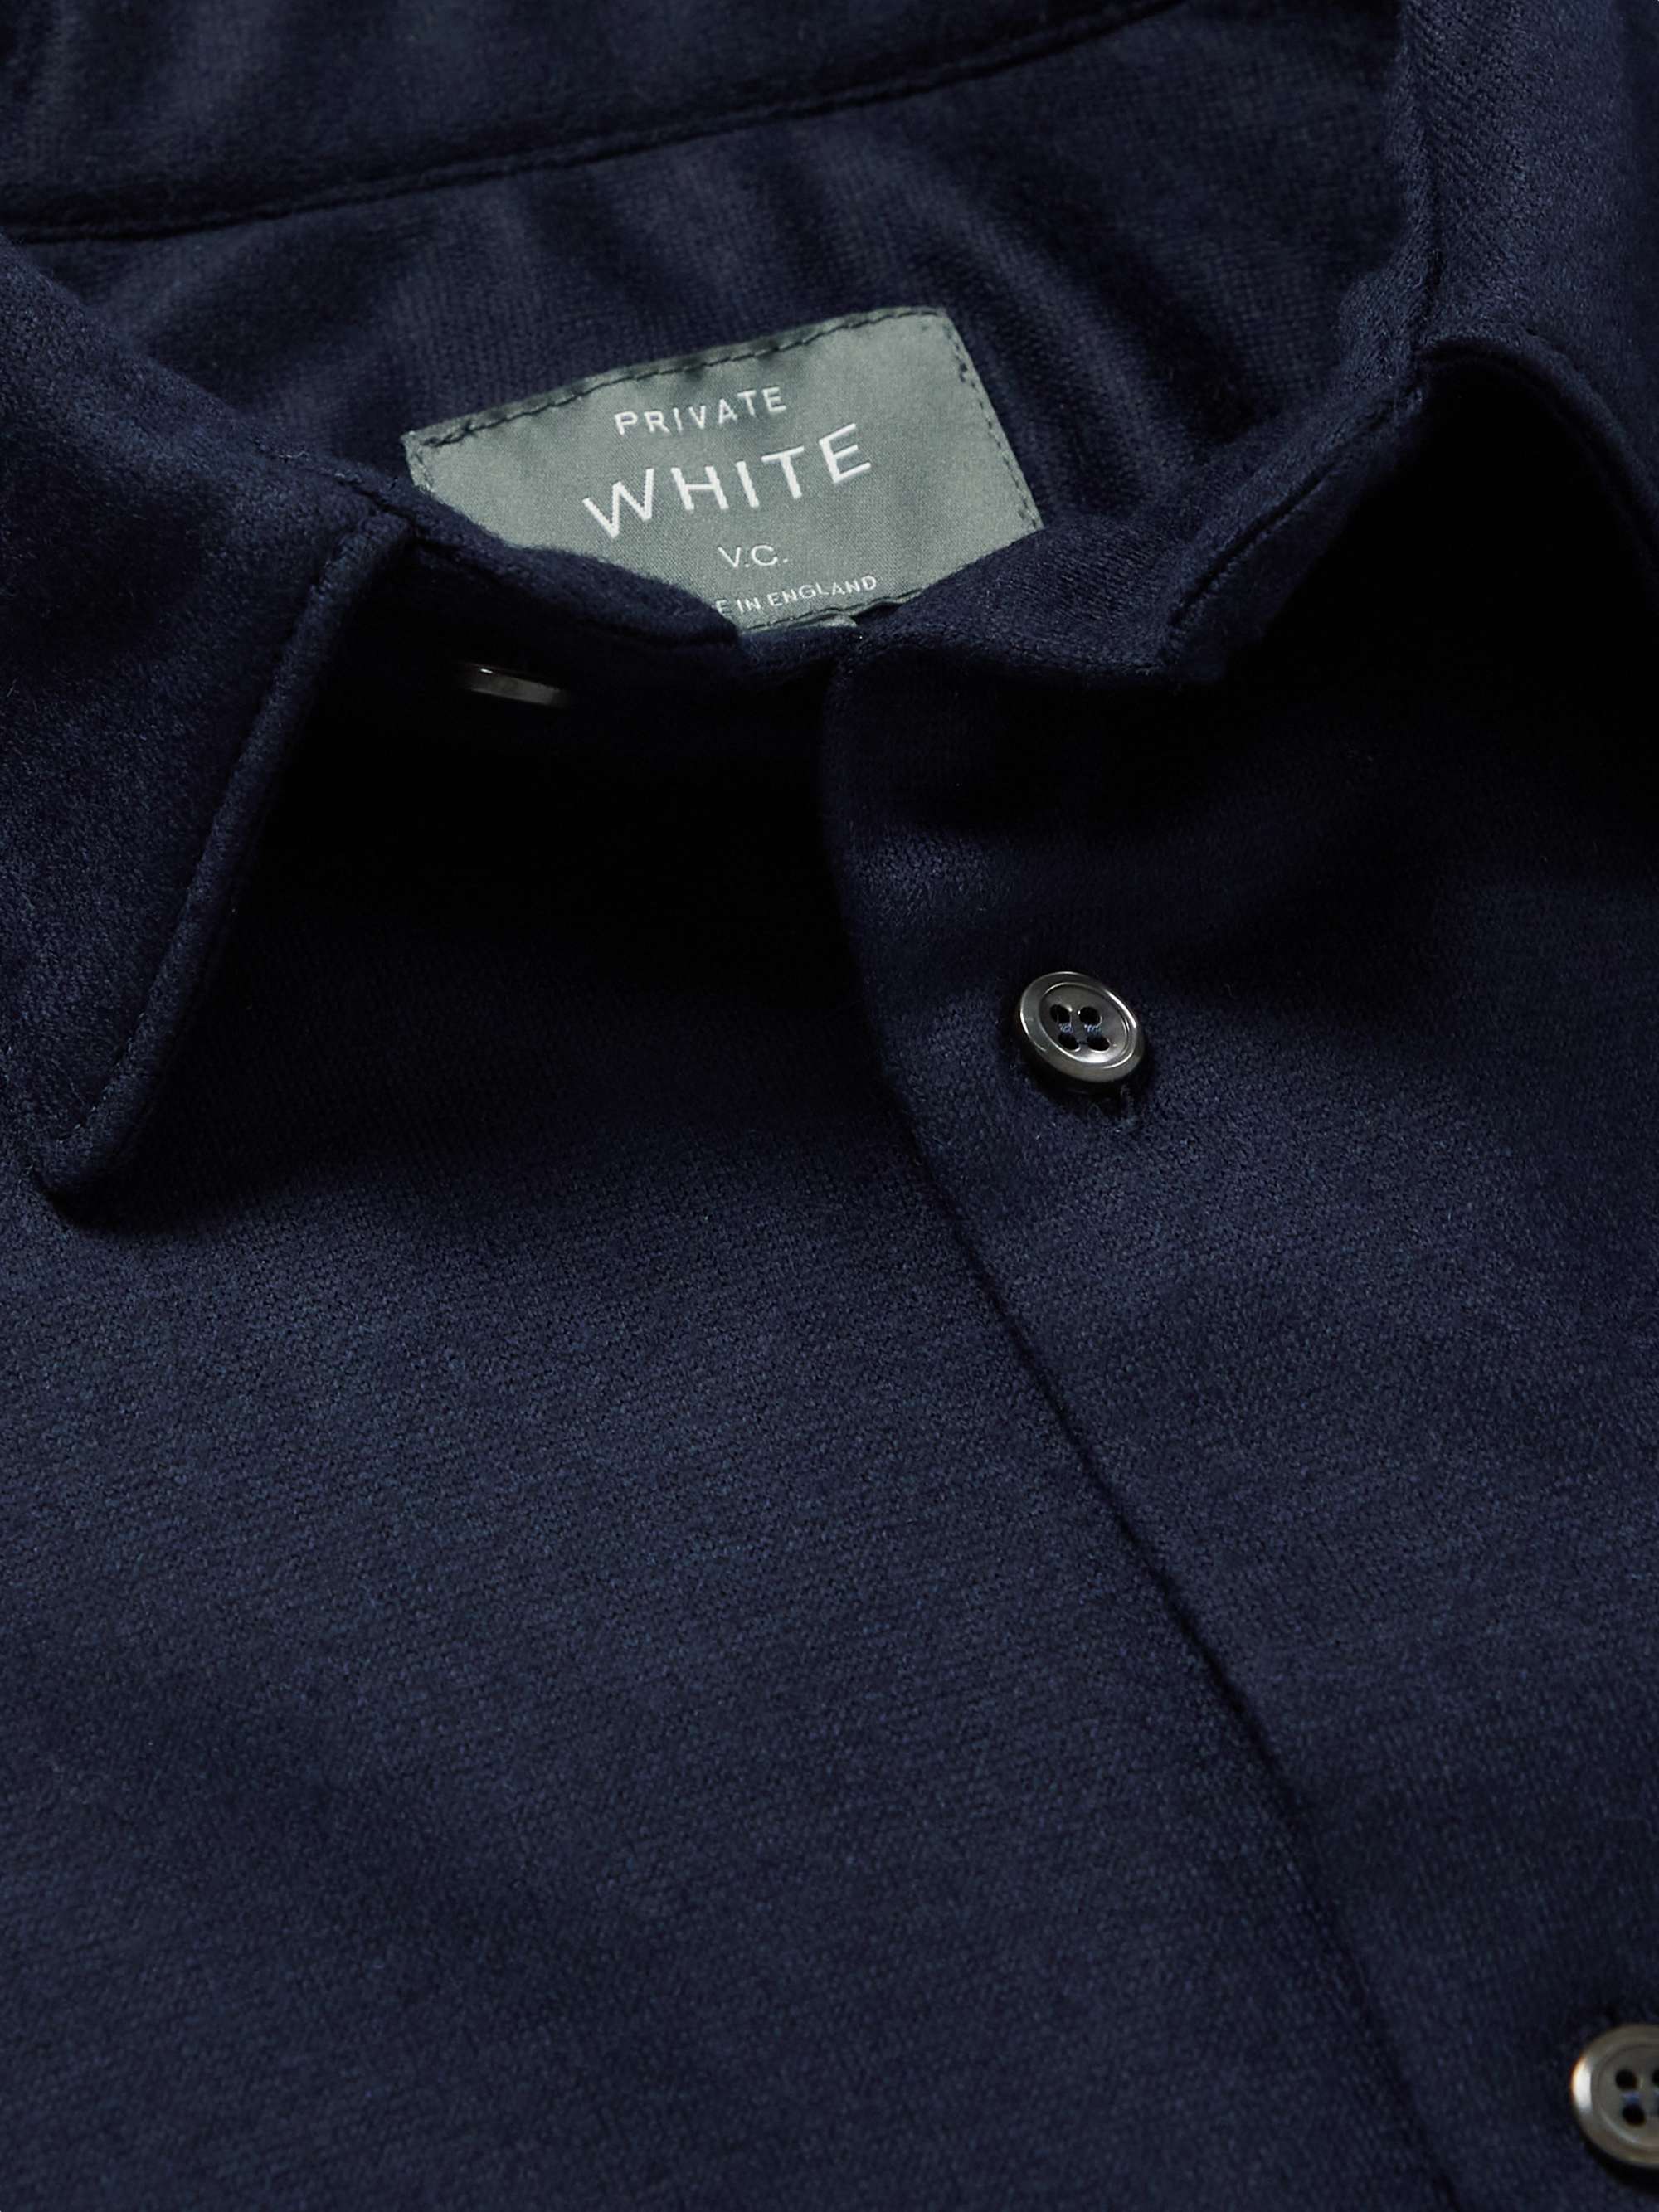 PRIVATE WHITE V.C. Wool and Cashmere-Blend Jersey Shirt